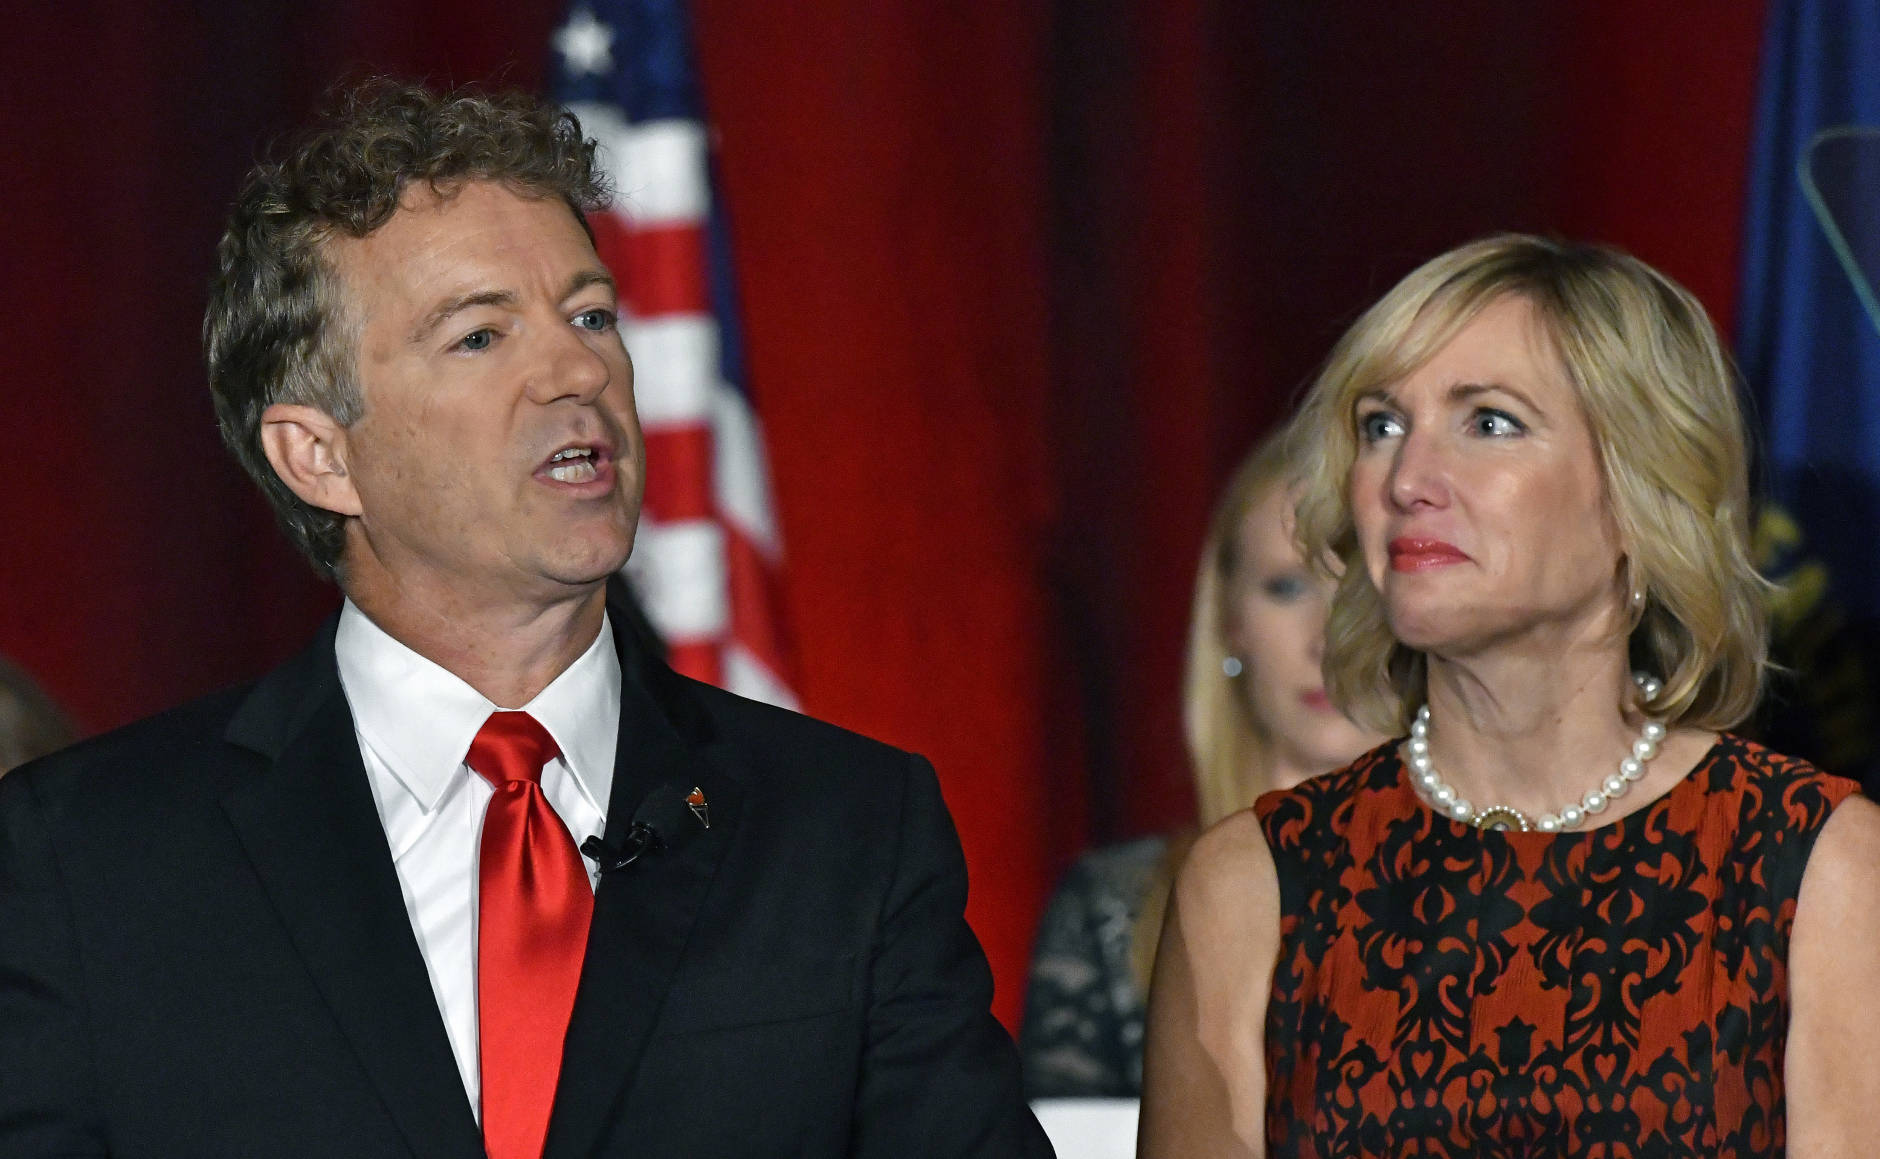 With his wile Kelley looking on, Sen. Rand Paul, R-Ky. speaks to the crowd gathered at his victory celebration, Tuesday, Nov. 8, 2016, in Louisville Ky. (AP Photo/Timothy D. Easley)